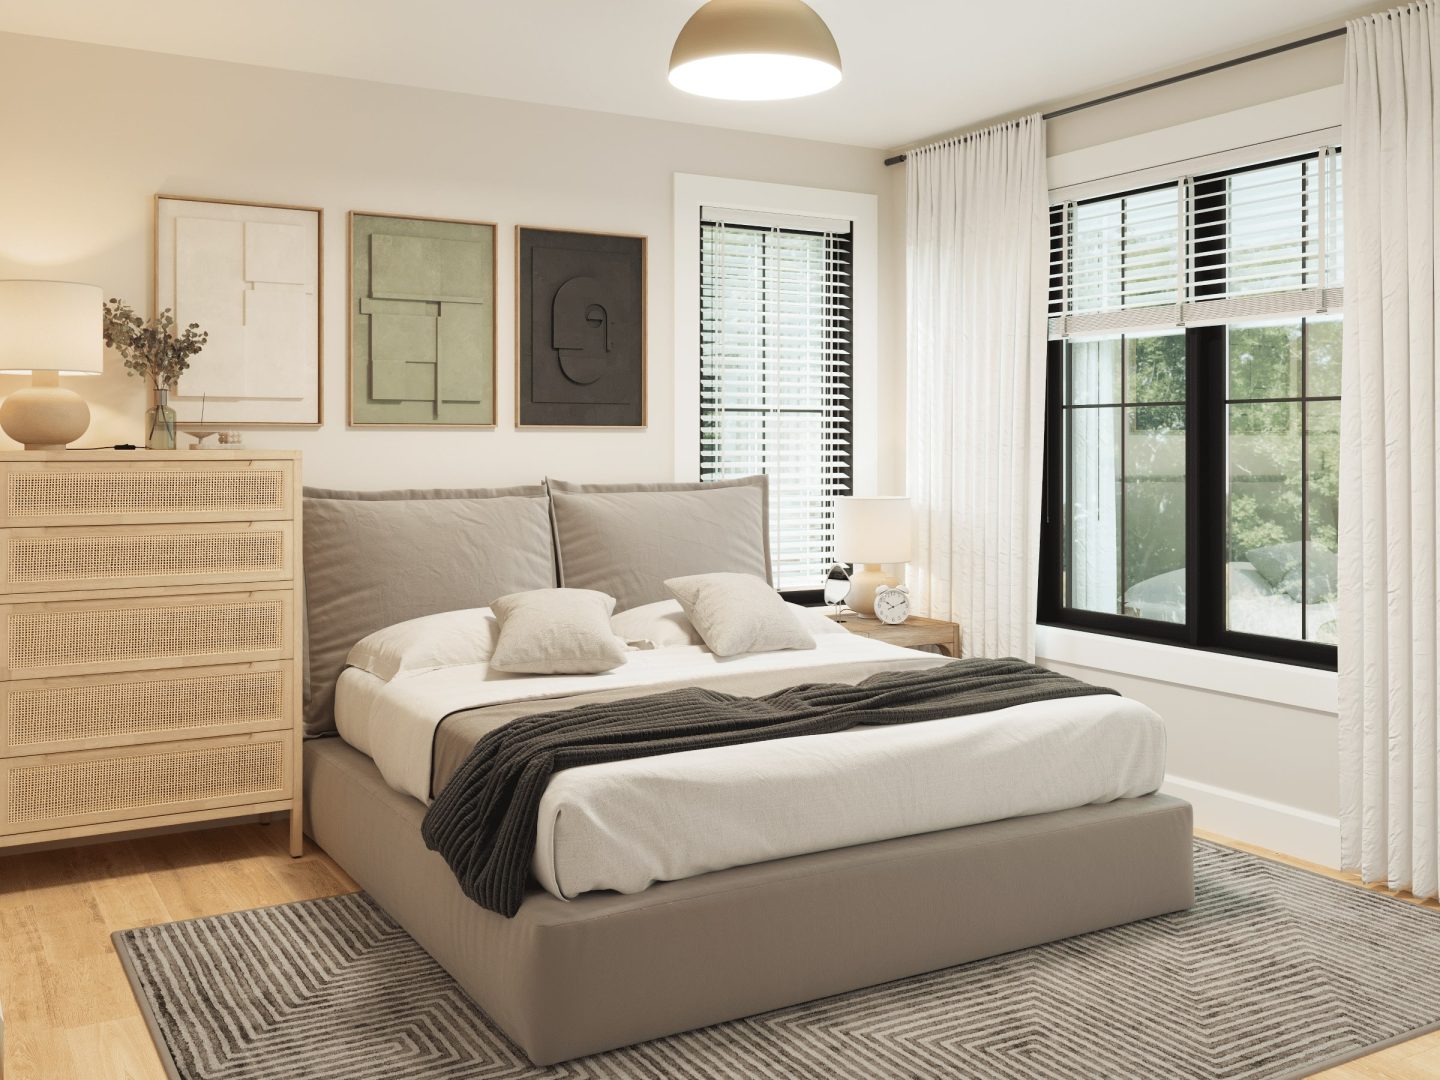 The Léa model is a contemporary single-story. View of the secondary bedroom.